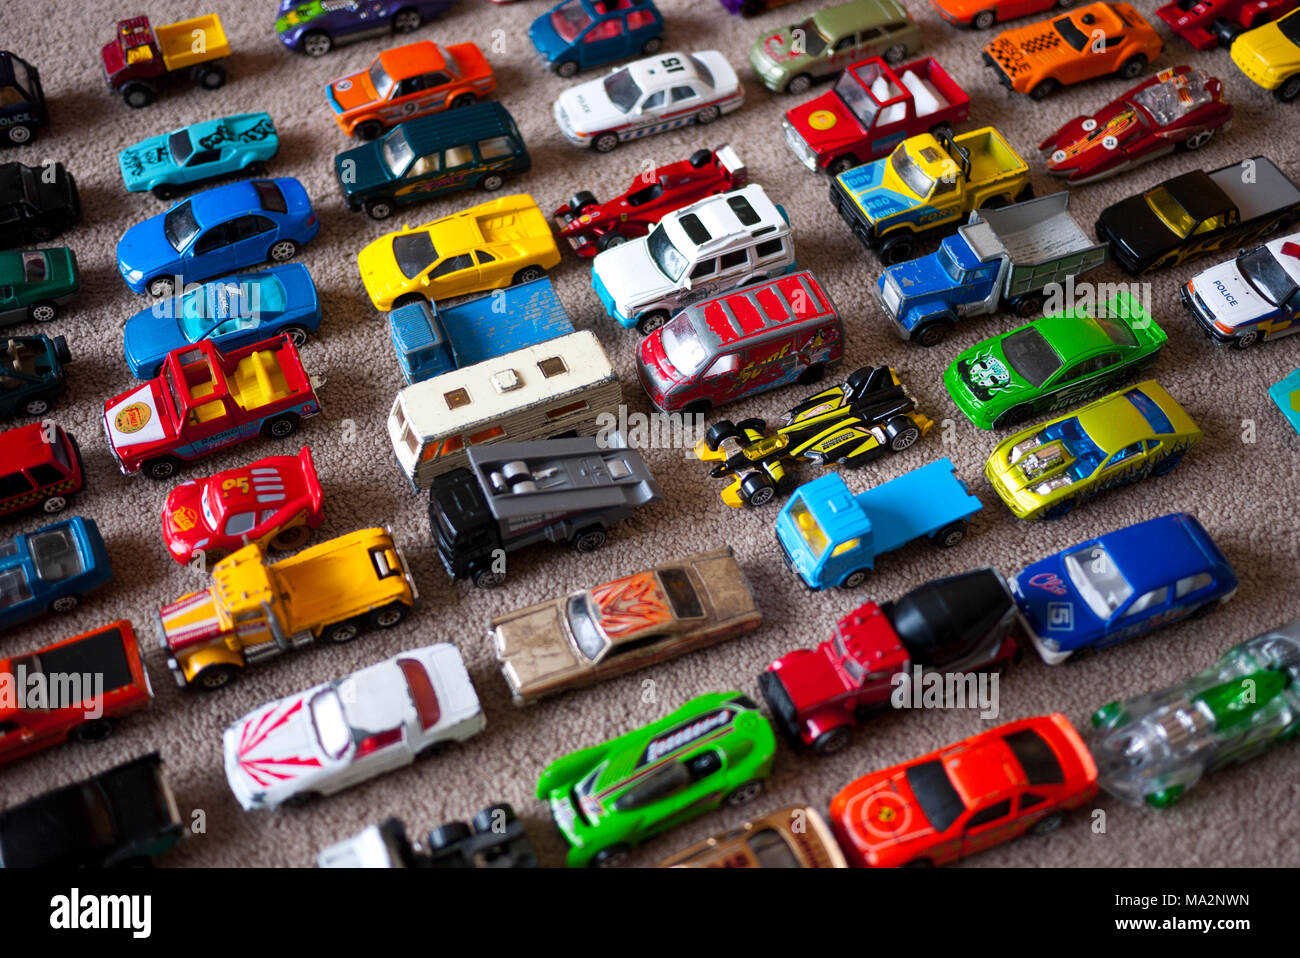 Toy cars lined up on carpet floor, England, UK. Stock Photo